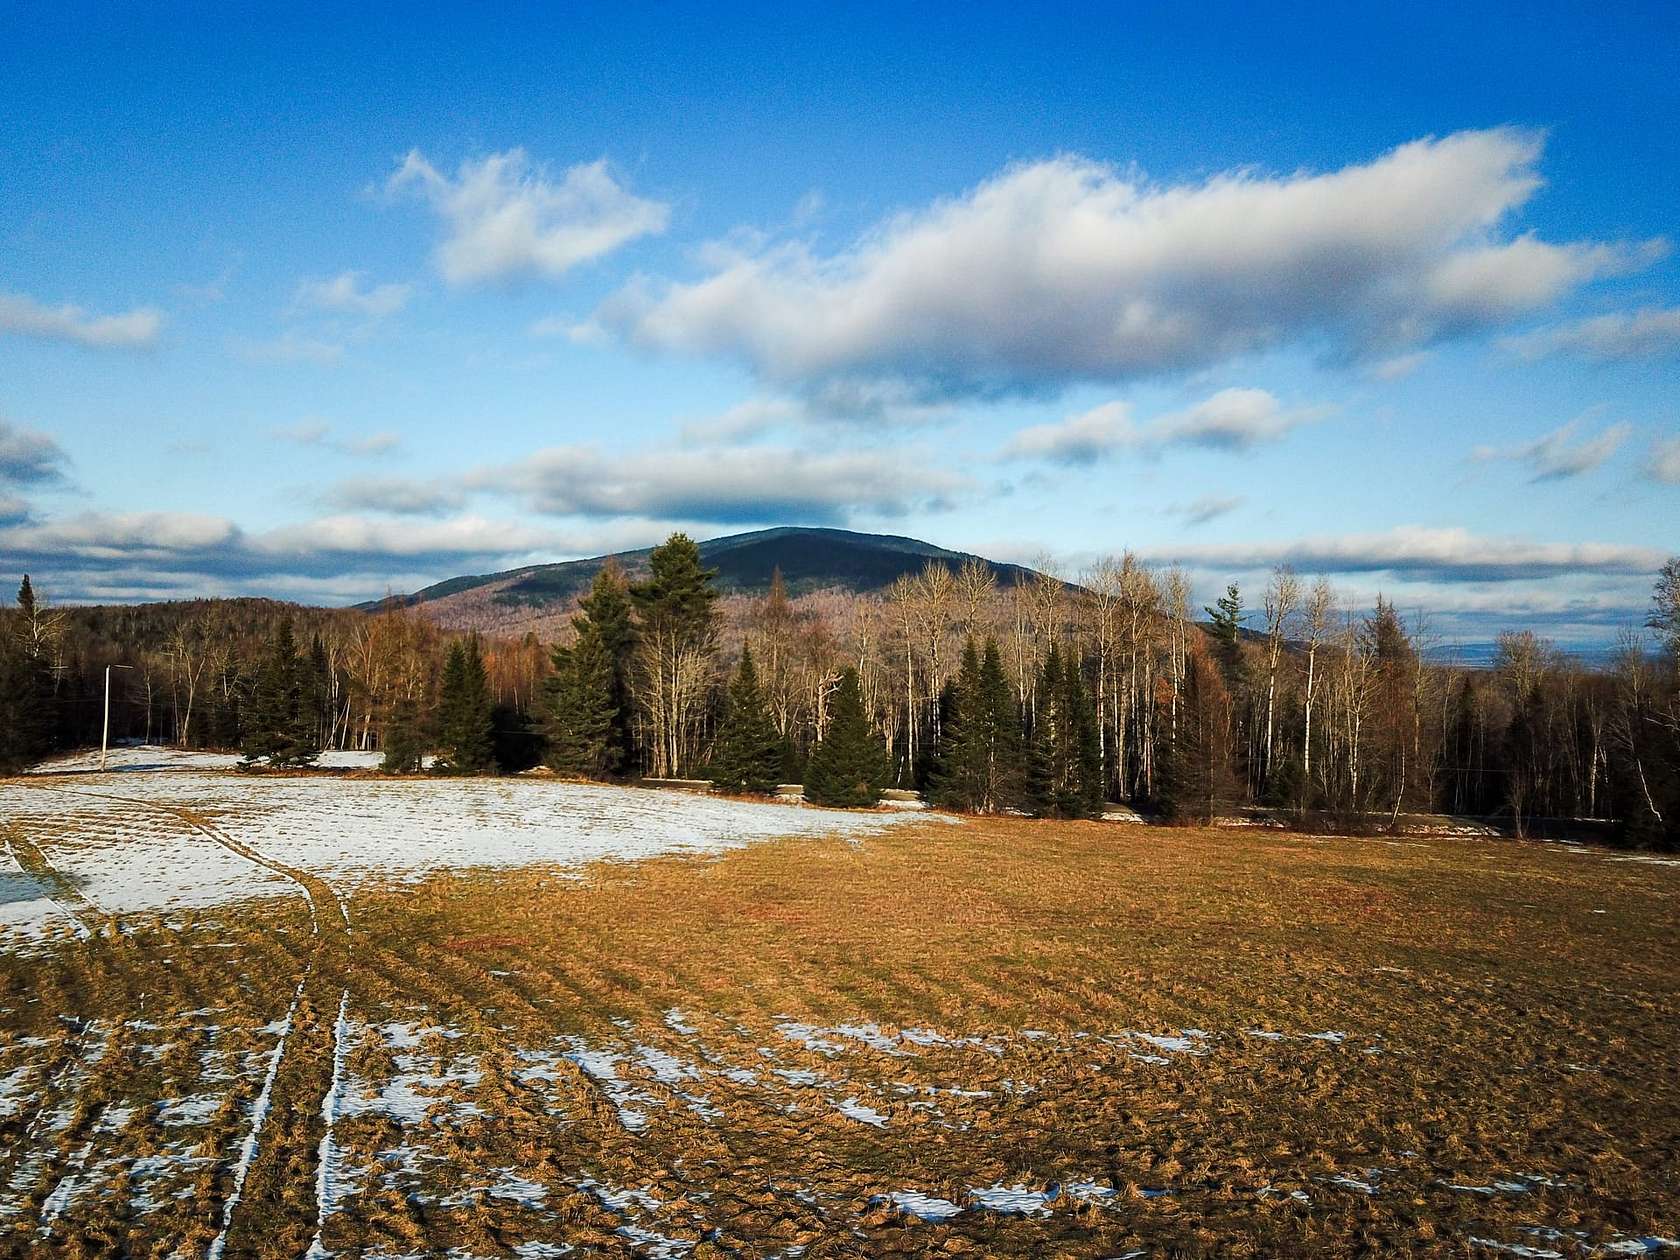 21.1 Acres of Recreational Land for Sale in Lemington Town, Vermont